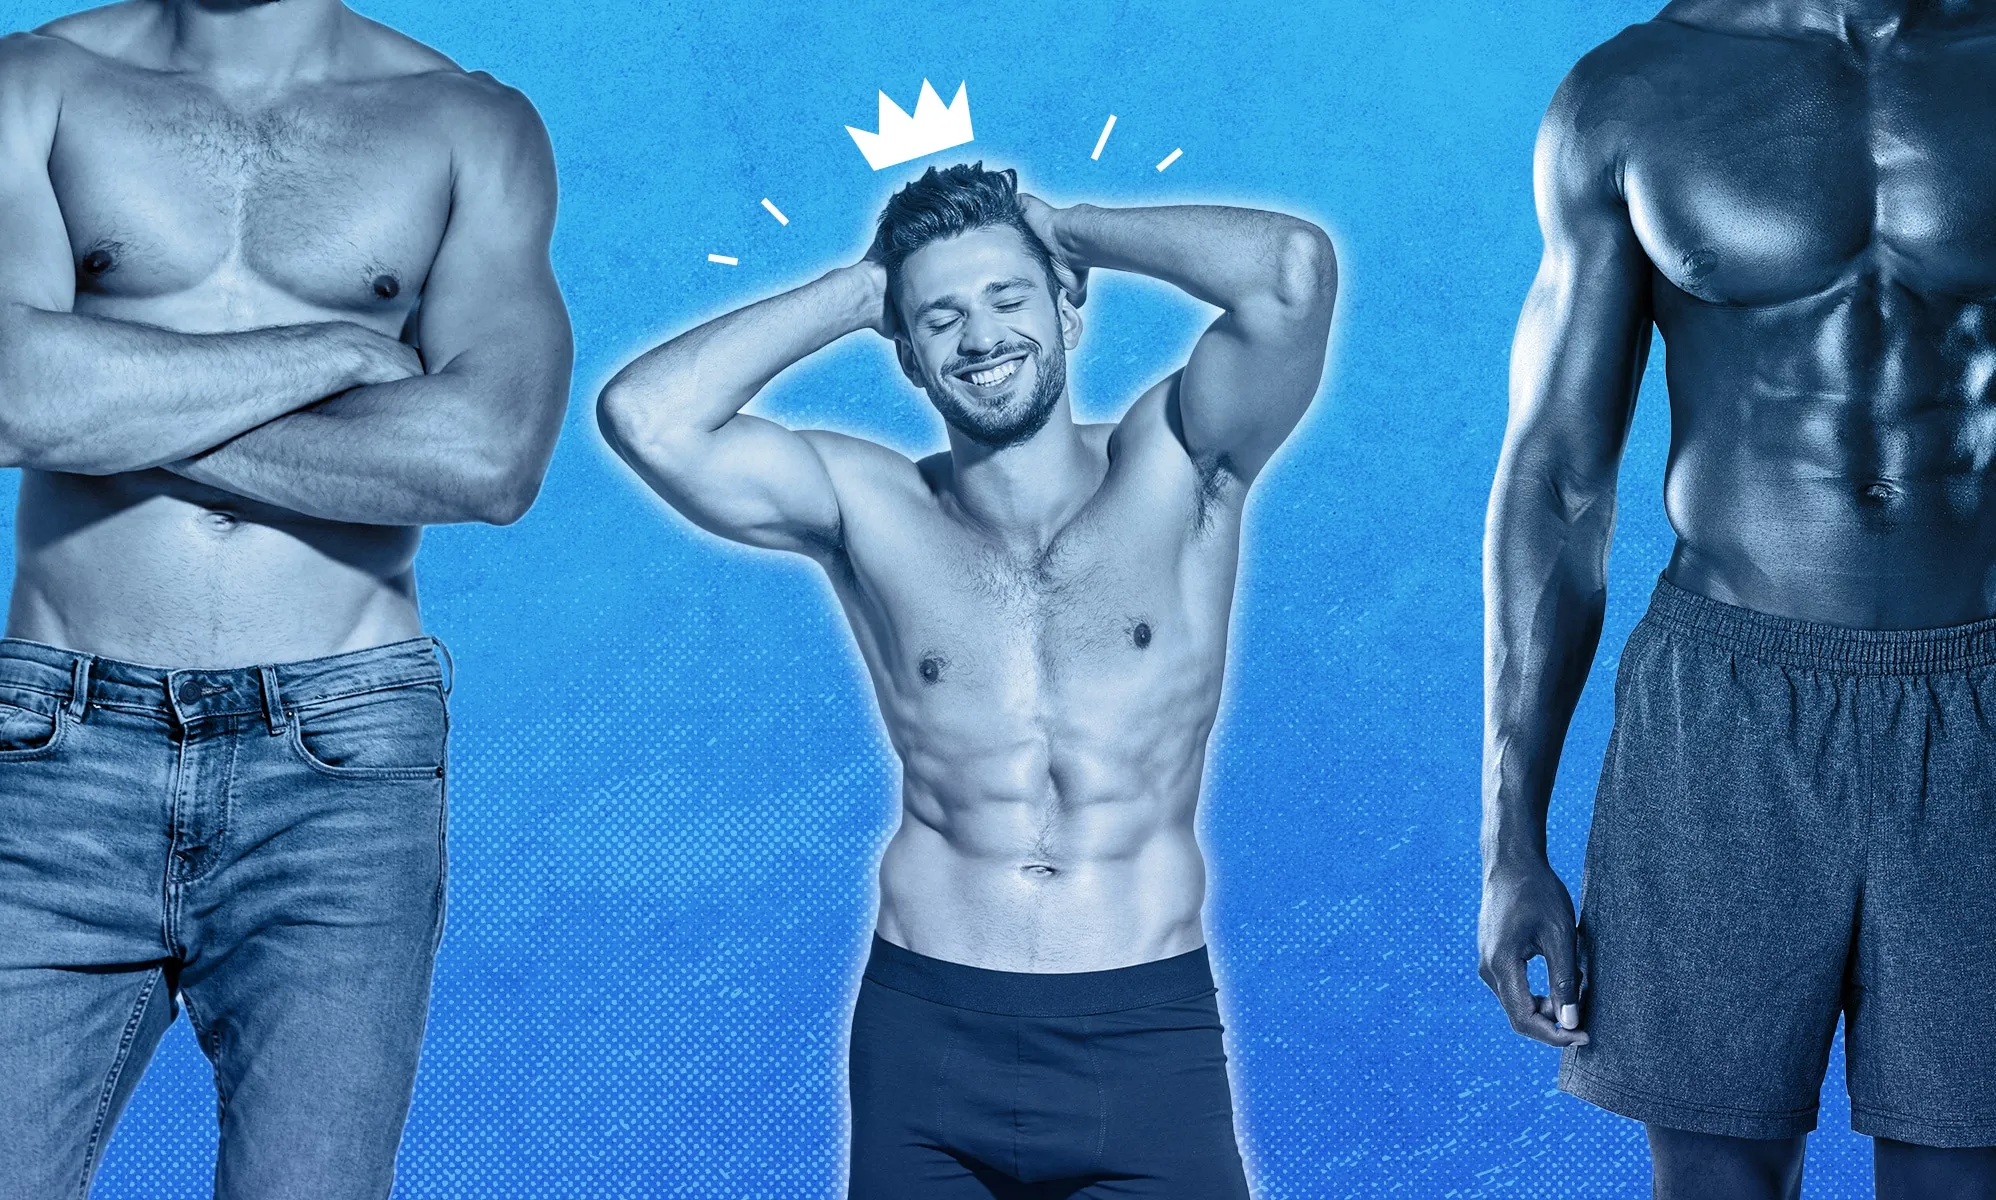 Is it weird that my guy best friend wants me to wear his boxers? What does  it mean? - Quora